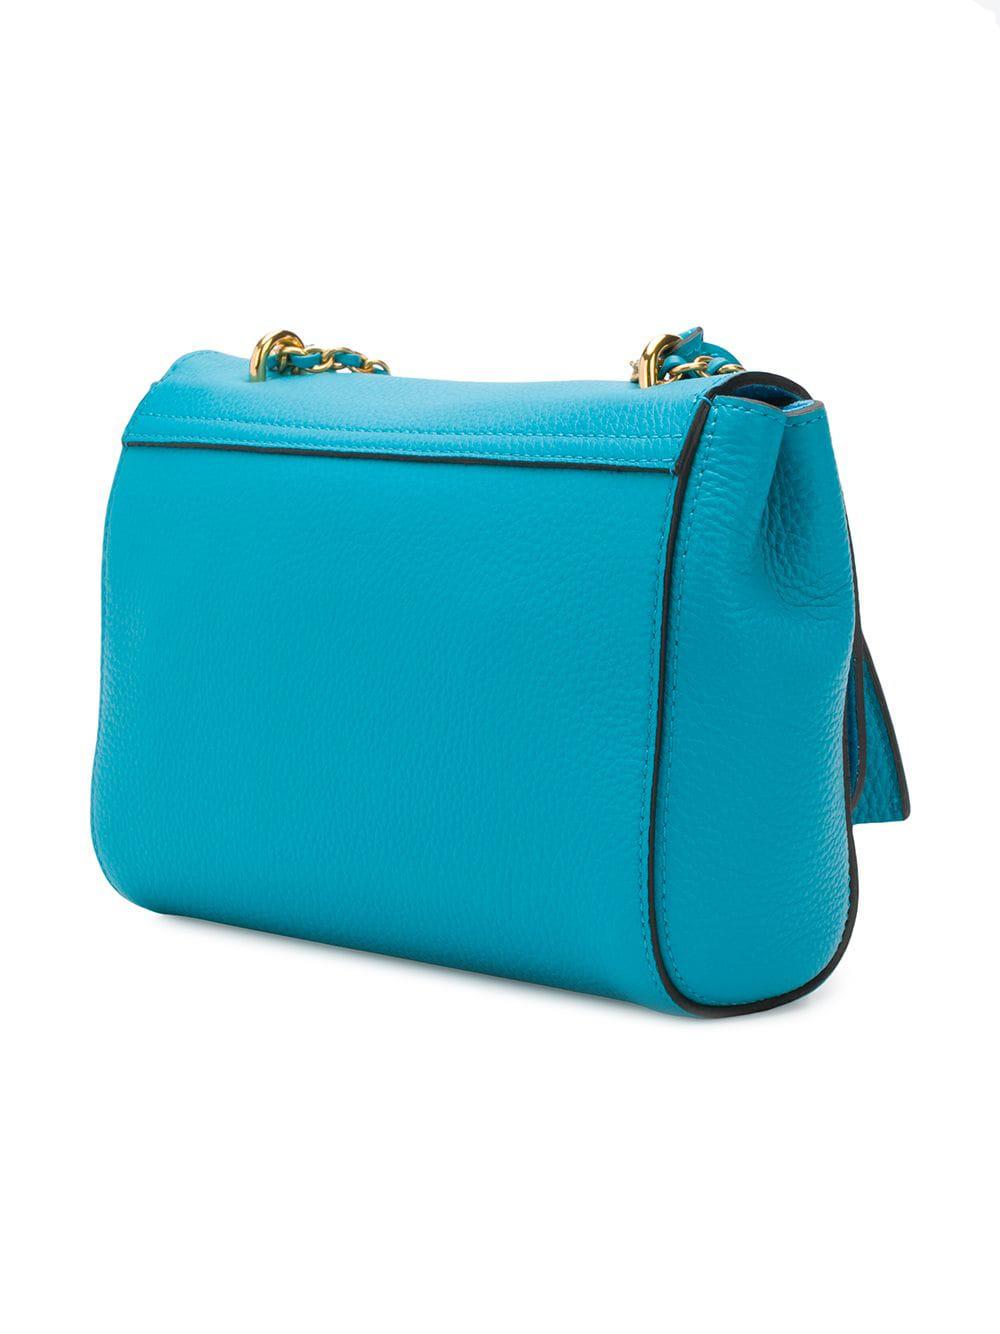 Mulberry Leather Lily Small Crossbody Bag in Blue - Lyst